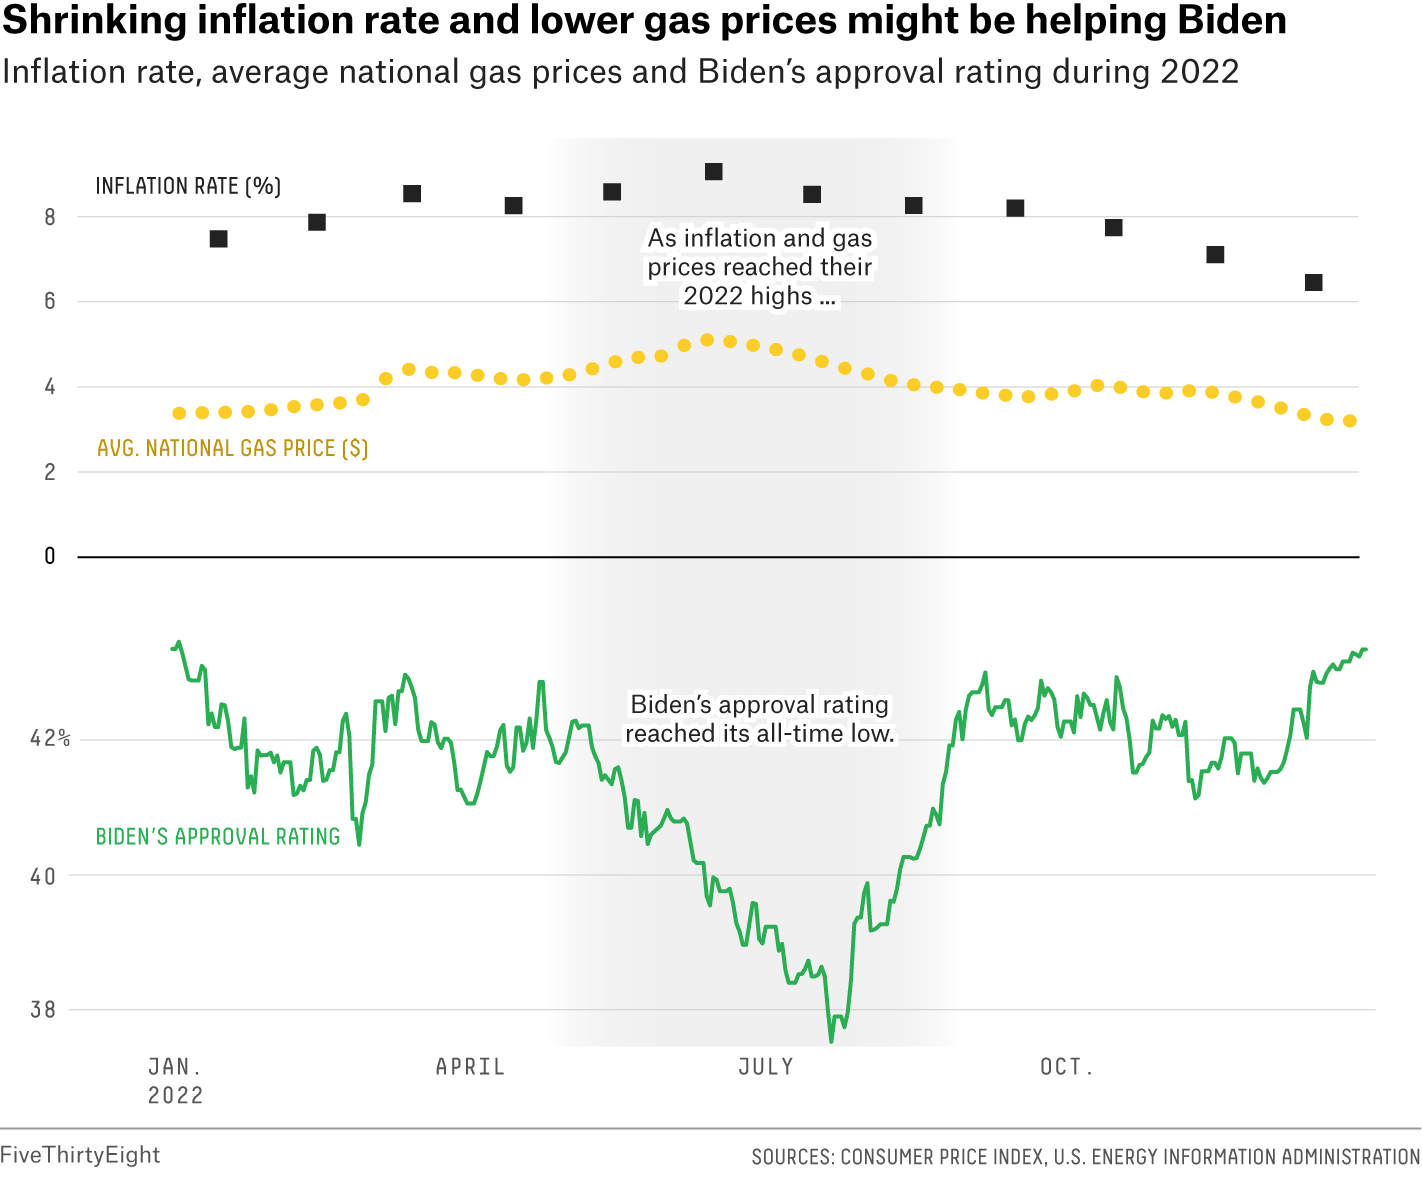 A multiple line chart showing the inflation rate and the average national gas price during 2022. A line chart showing President Biden’s approval rating is in the same timeframe, and how the rating’s all-time low in 2022 closely tied to that of inflation and gas price’s all-time high.